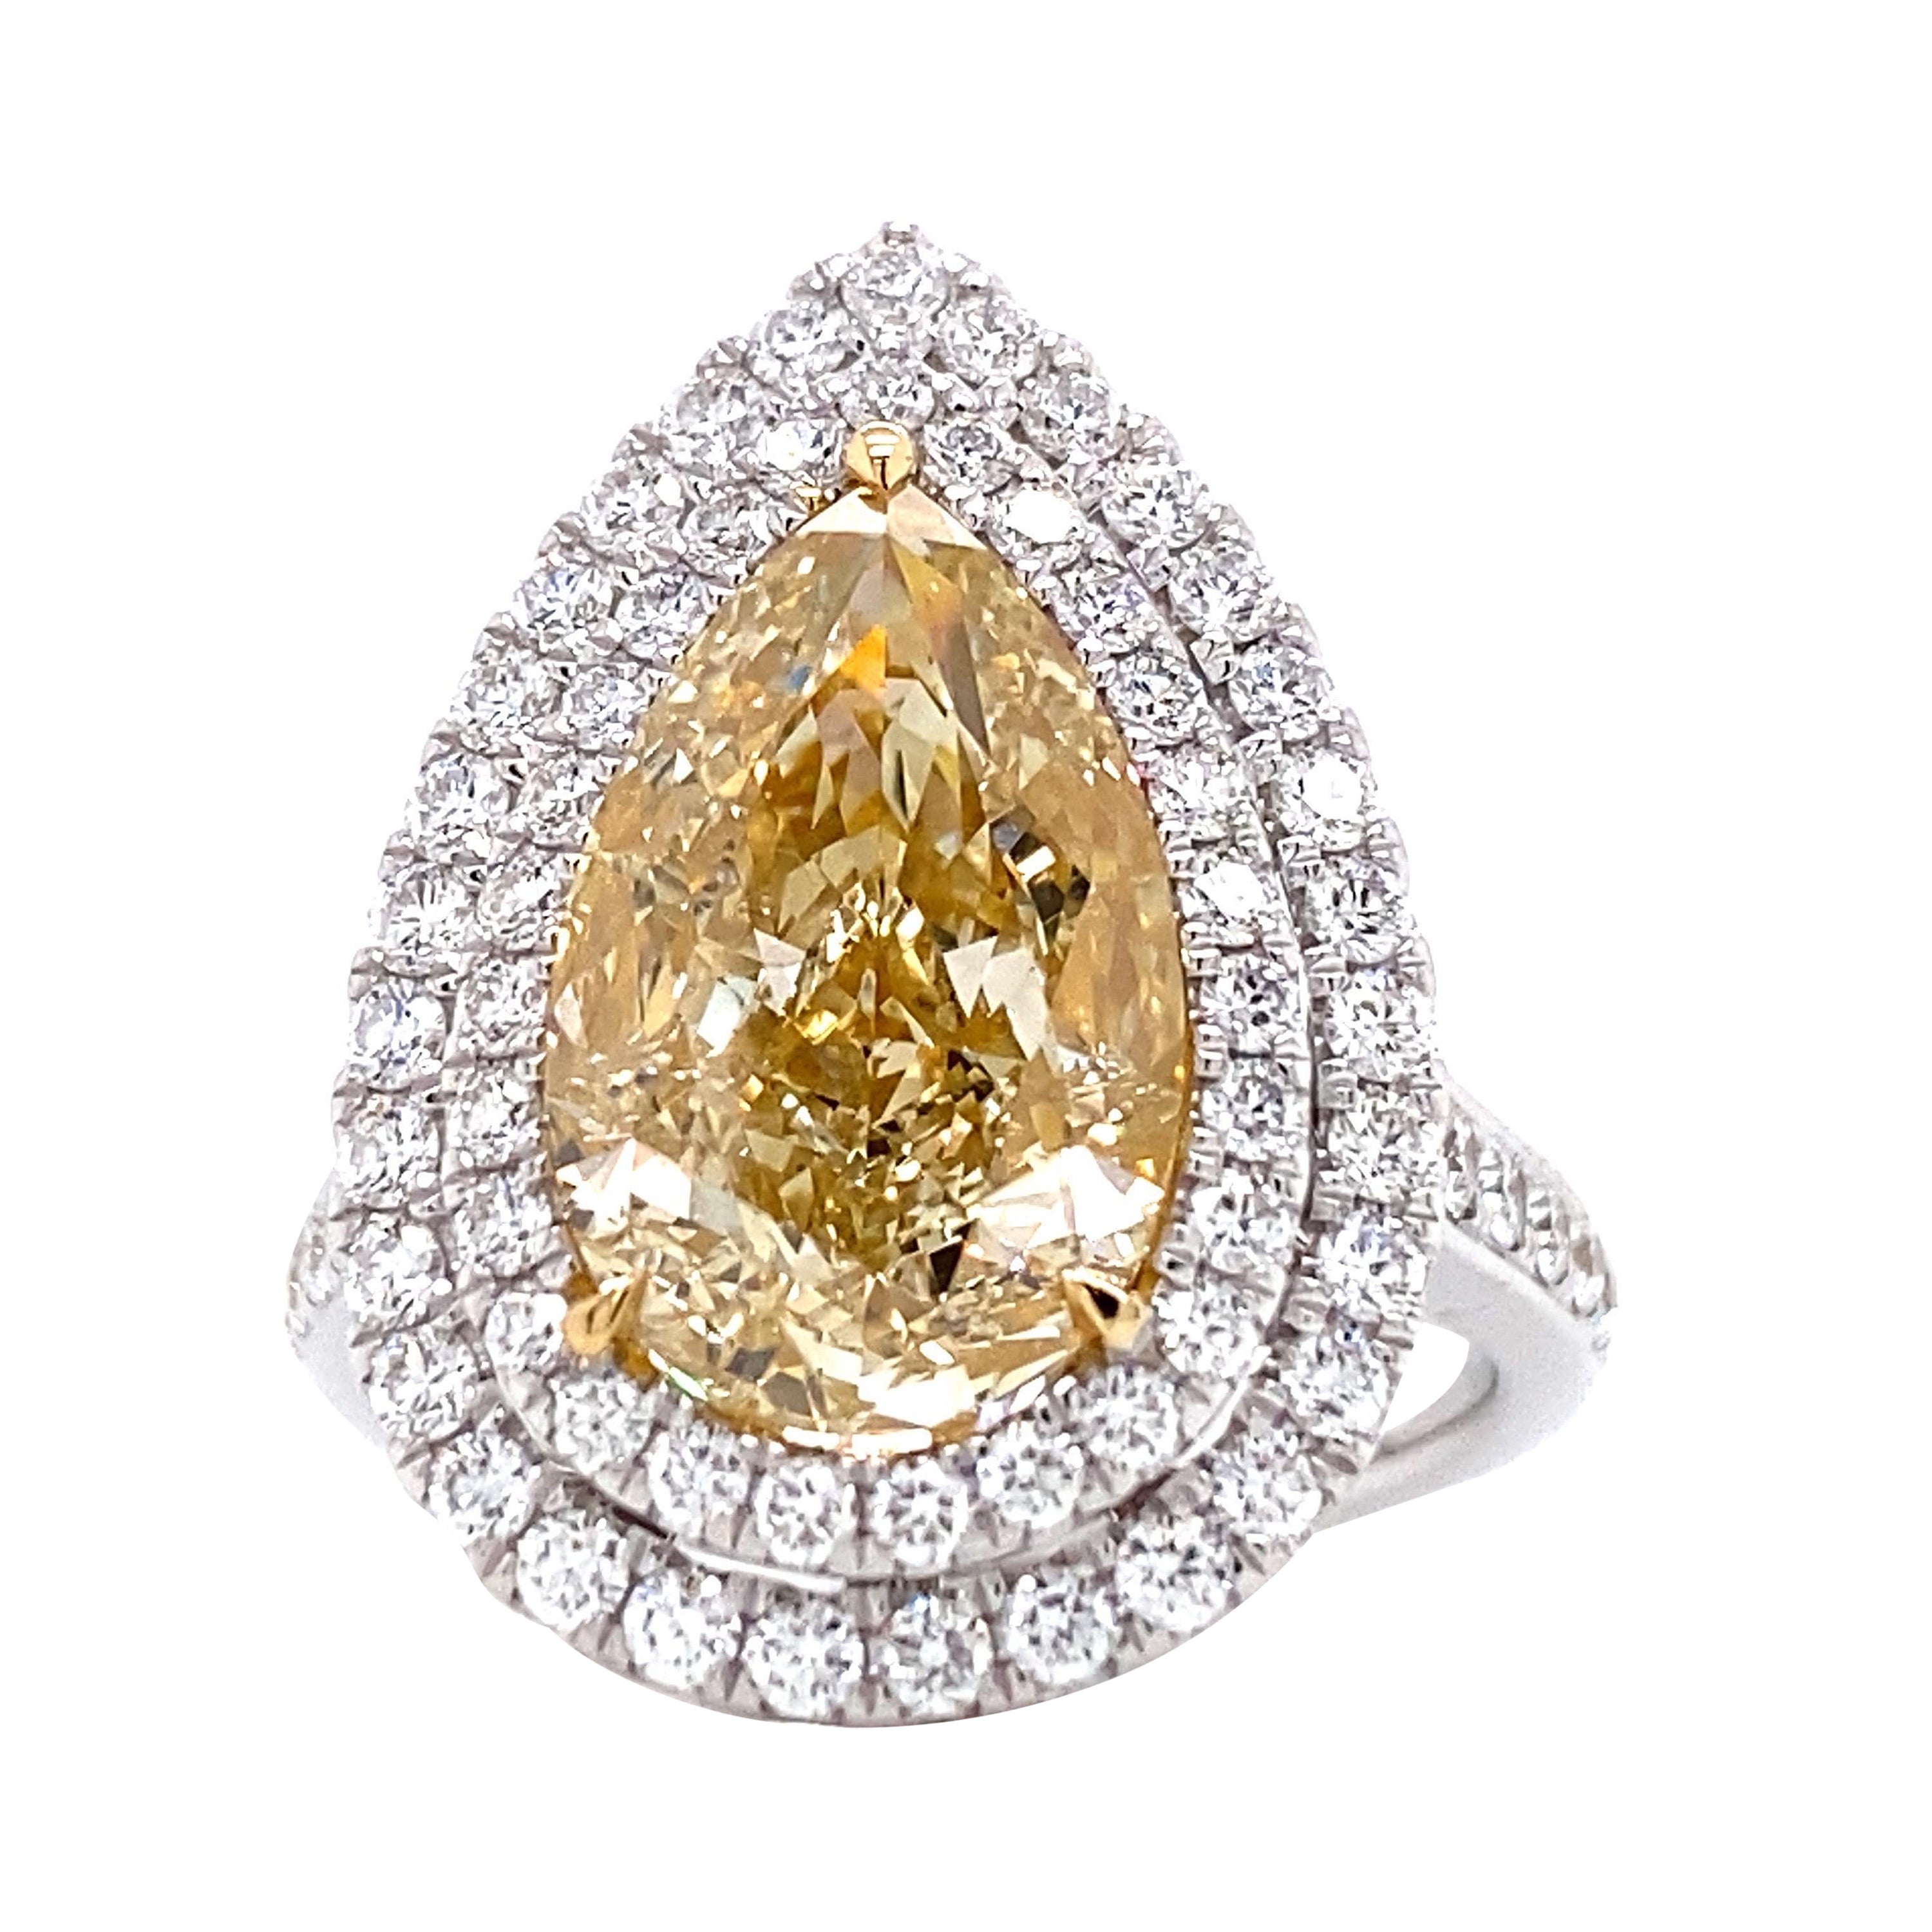 Emilio Jewelry GIA Certified 7.18 Carat Yellow Diamond Ring and Pendant  For Sale